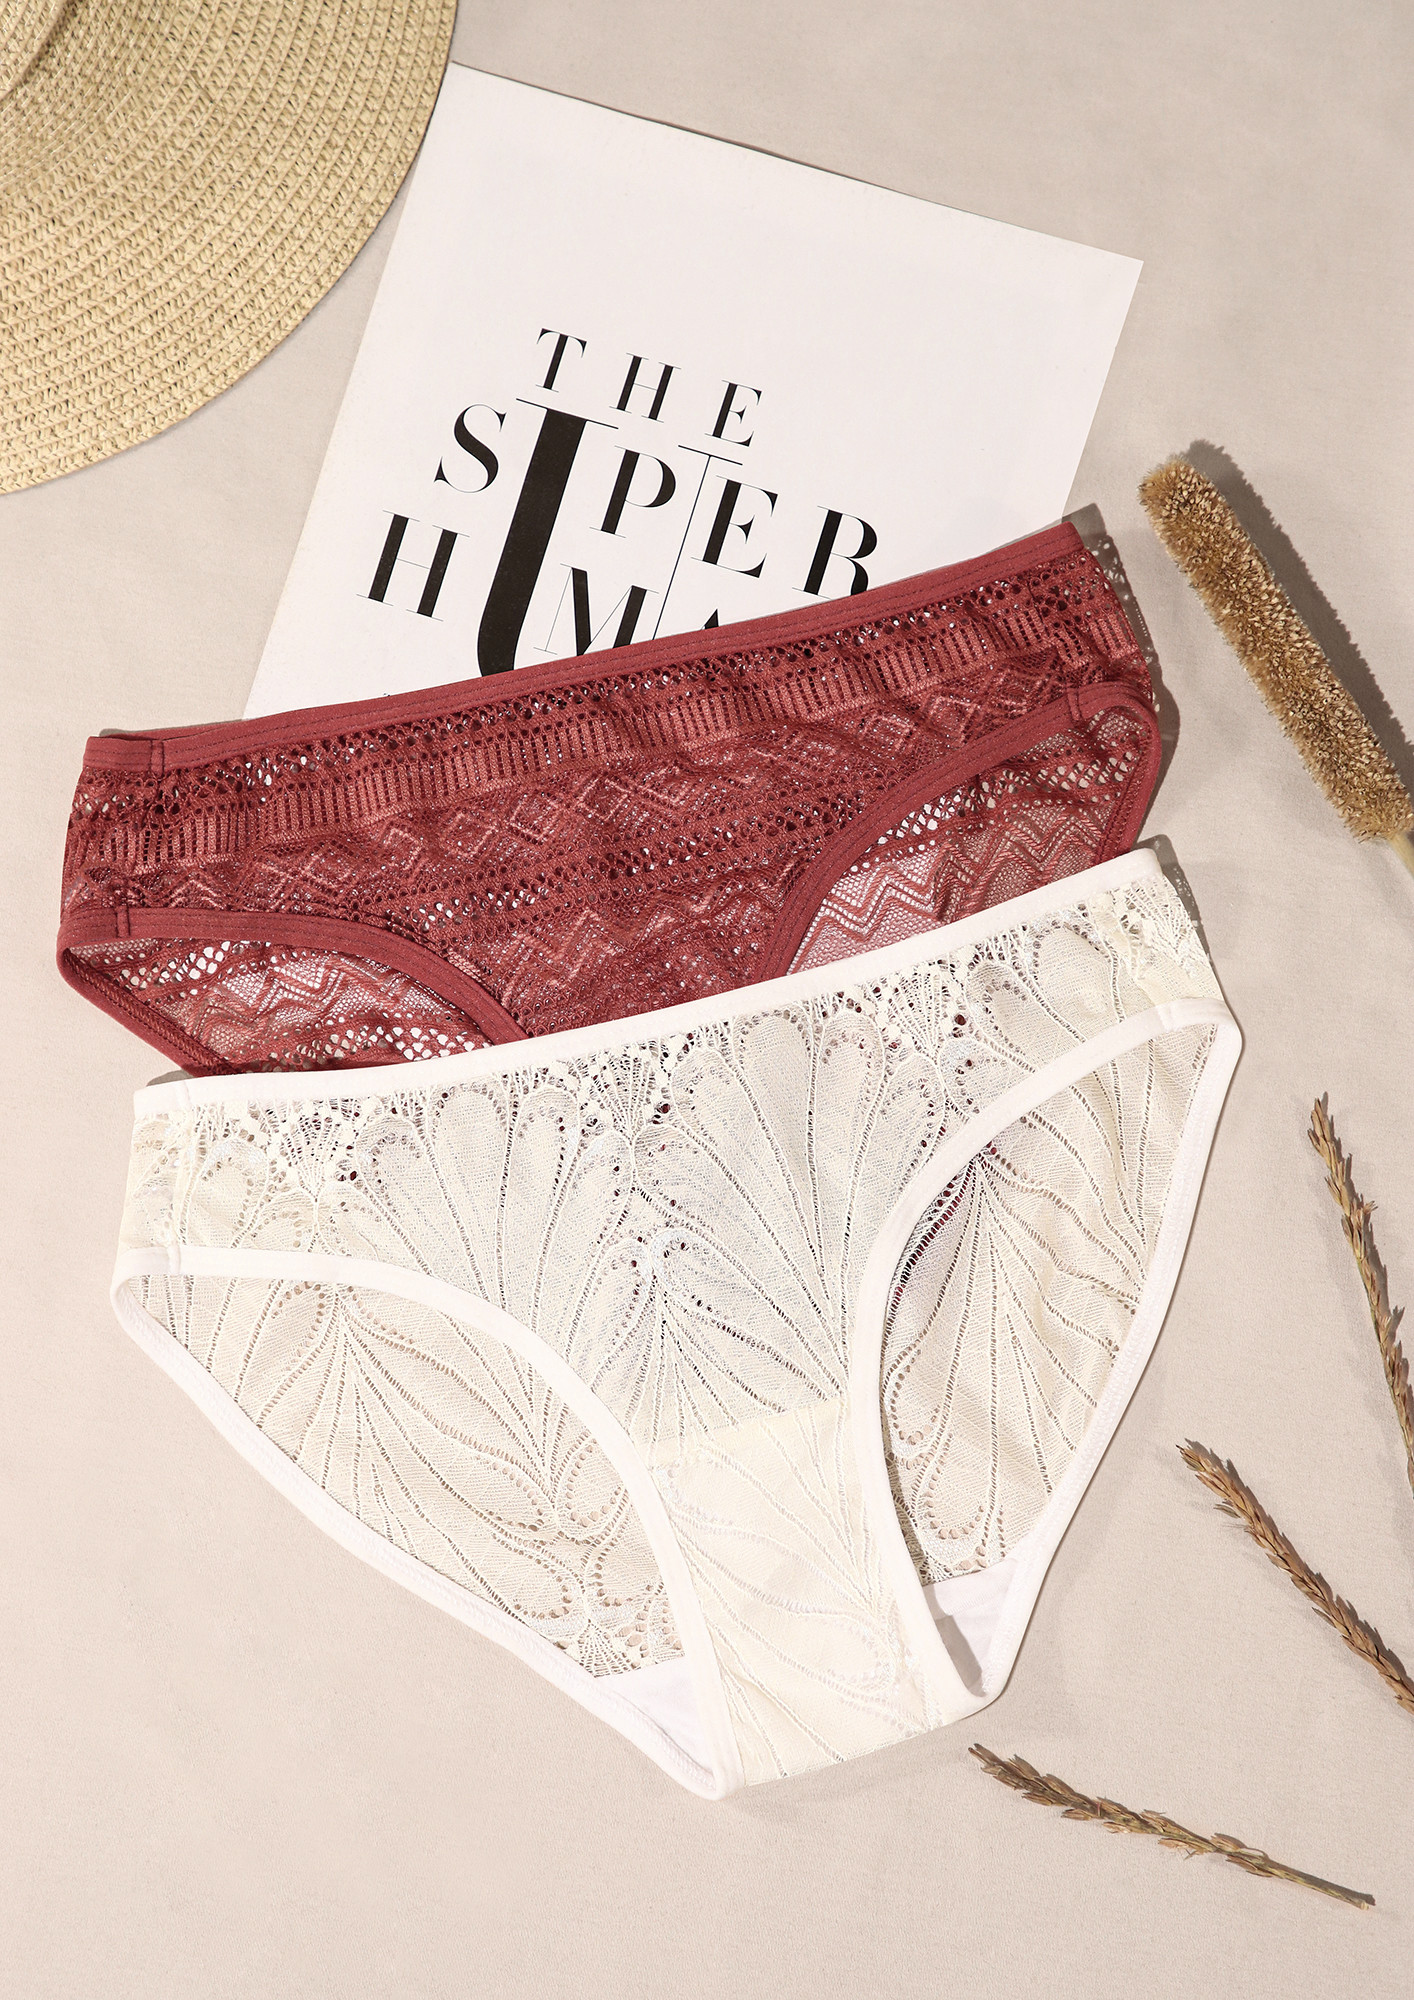 BREEZY RED AND WHITE LACE HIPSTER SET OF 2